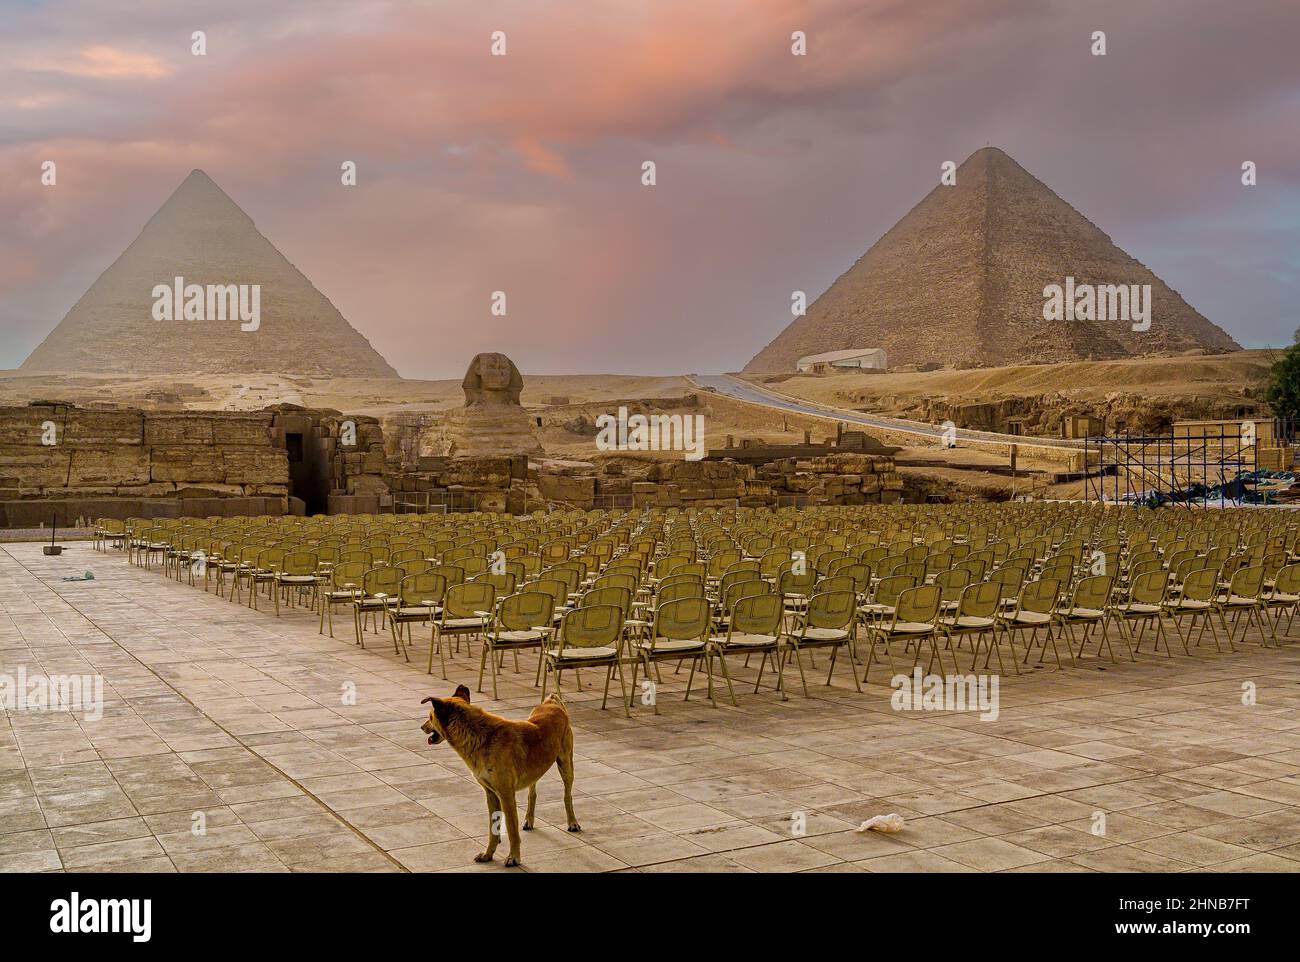 A stray dog wanders amongst the seating arrangement for the evening's Pyramids Sound & Light show in Giza Stock Photo